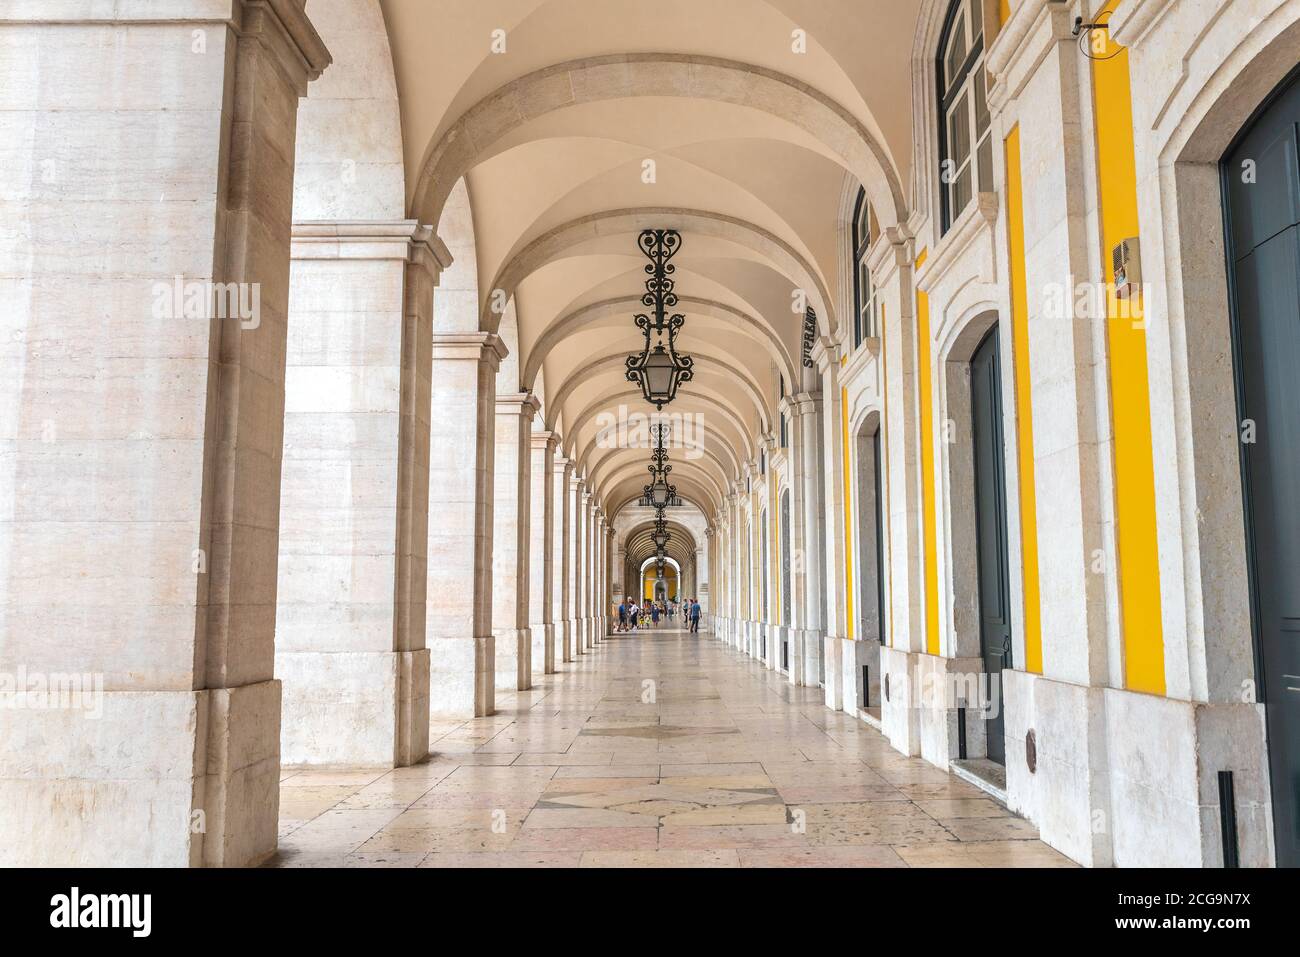 Marble arcade with beautiful lamps, yellow painting and architectural details in Praca do Comercio, Lisbon - Portugal Stock Photo